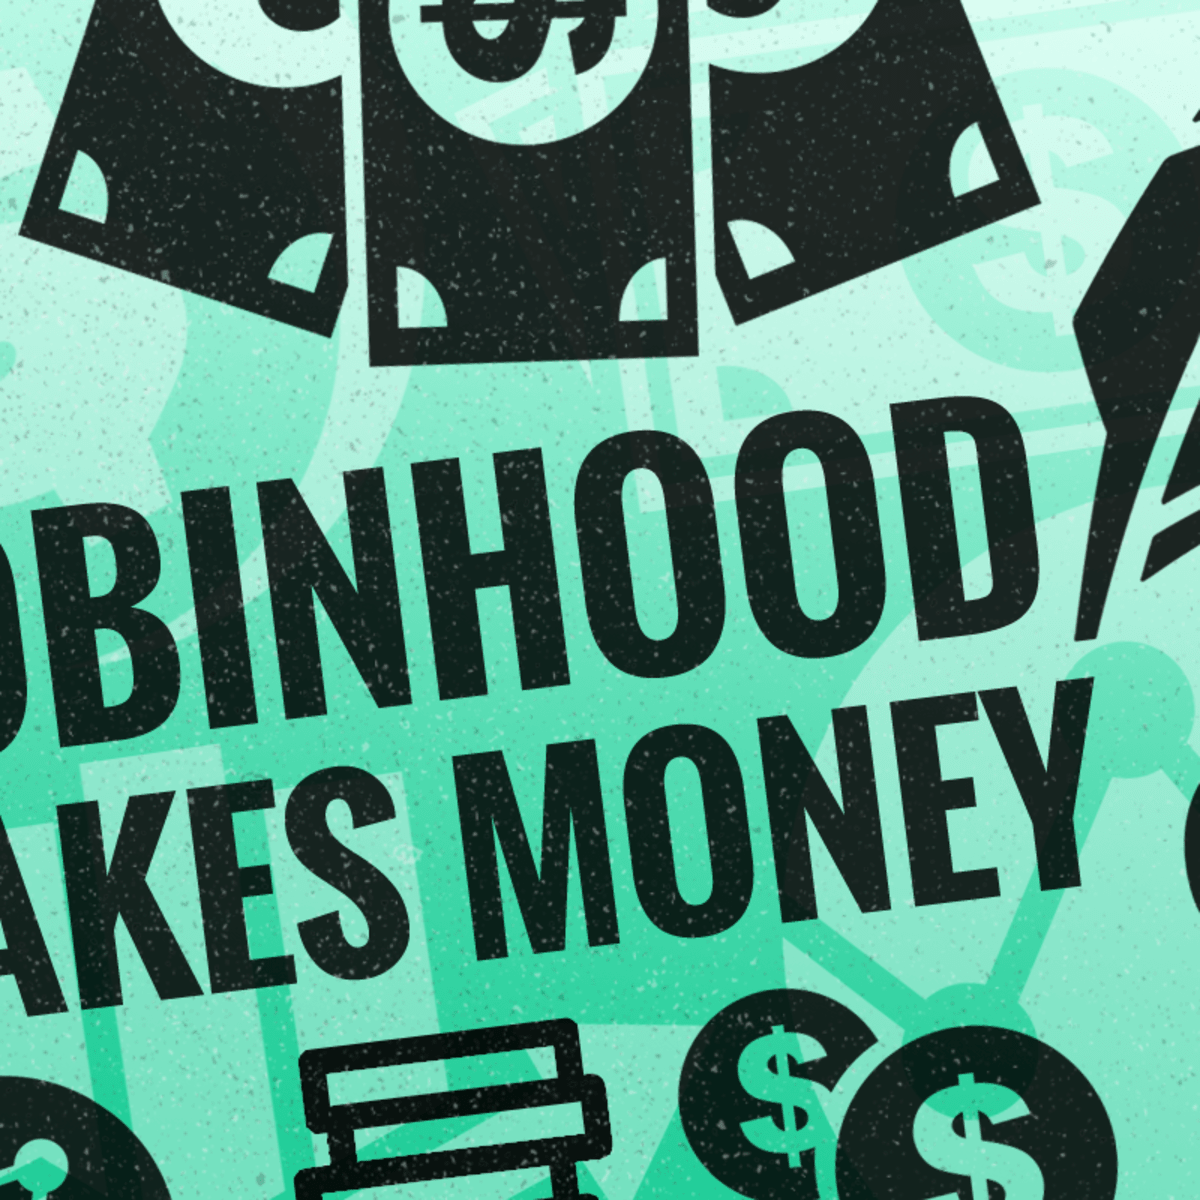 Robinhood Pays $65 Million To SEC For Misleading Customers Who